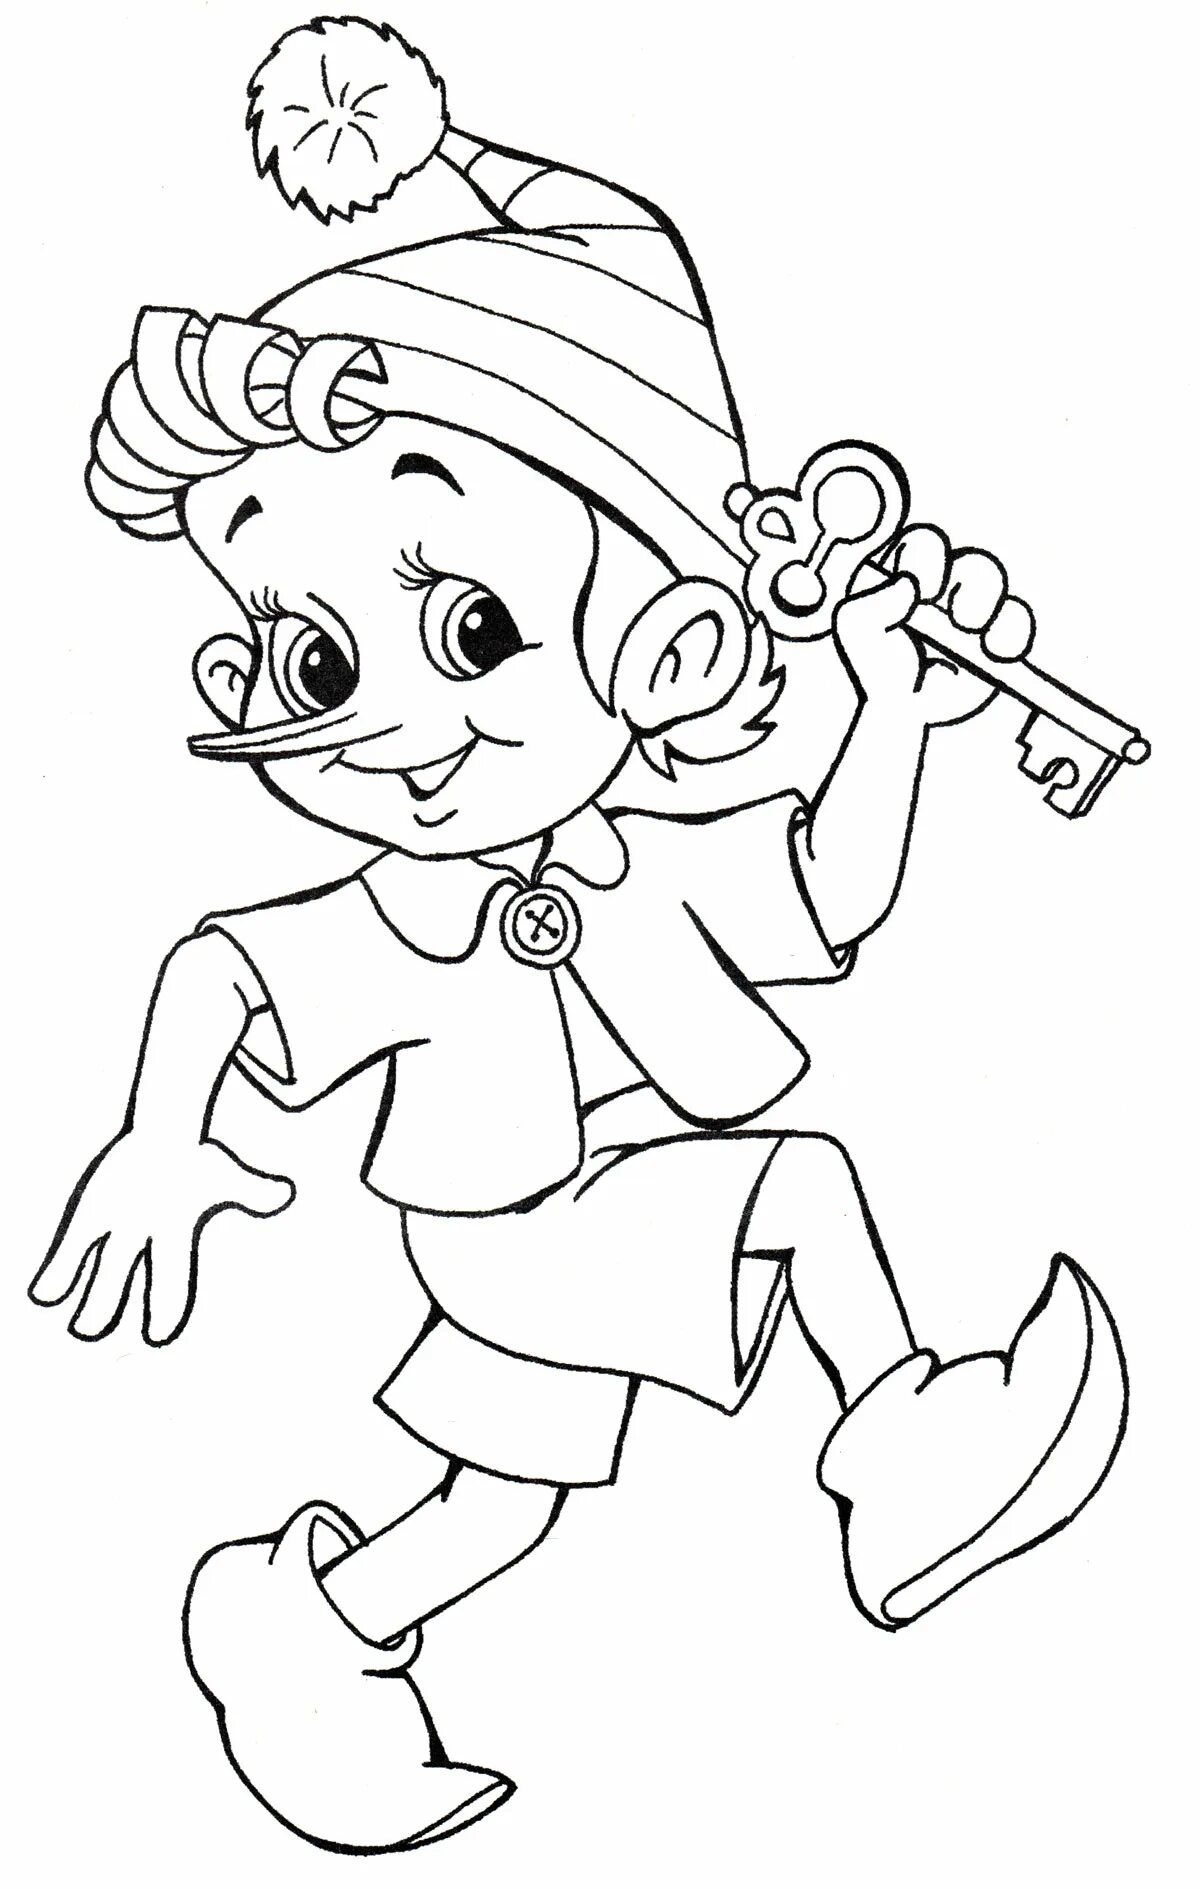 Awesome pinocchio coloring book